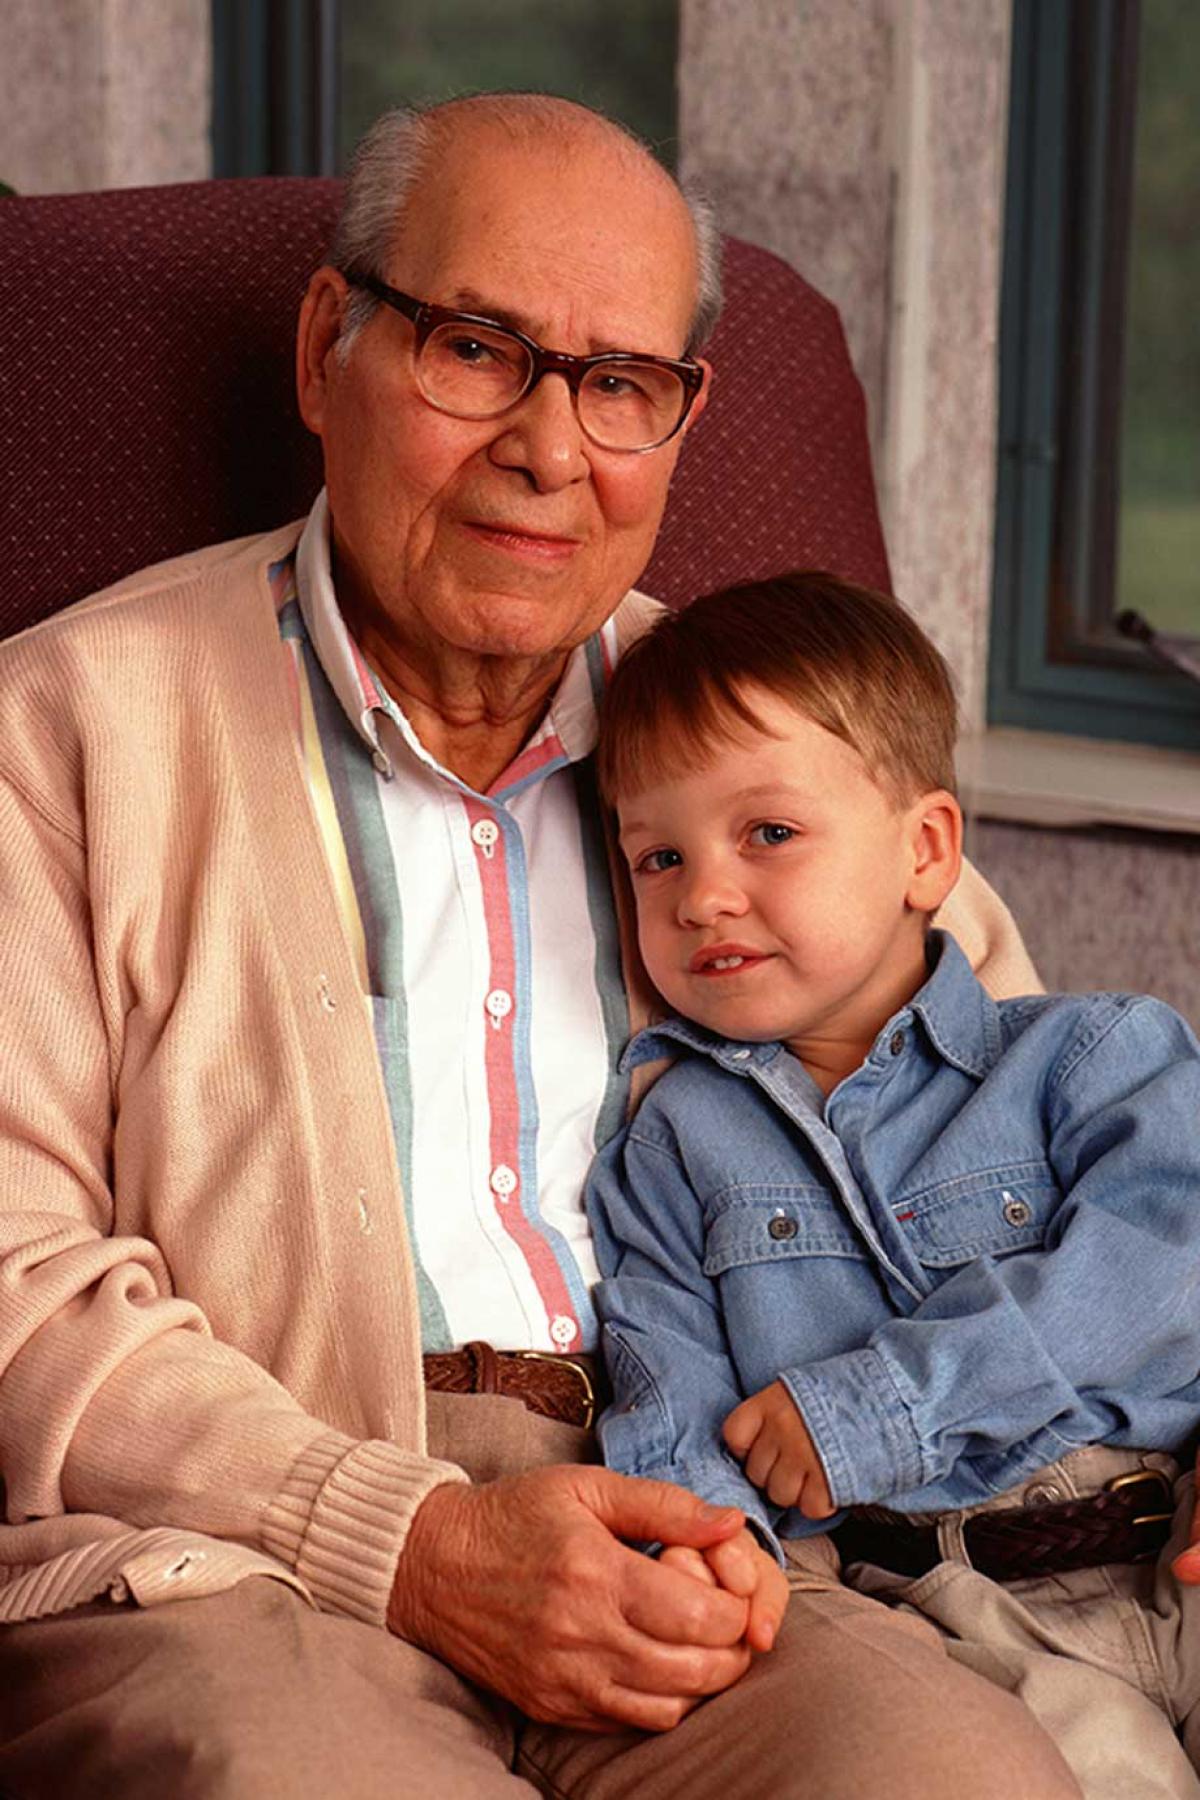 An elderly gentleman sitting in an arm chair with a young boy 